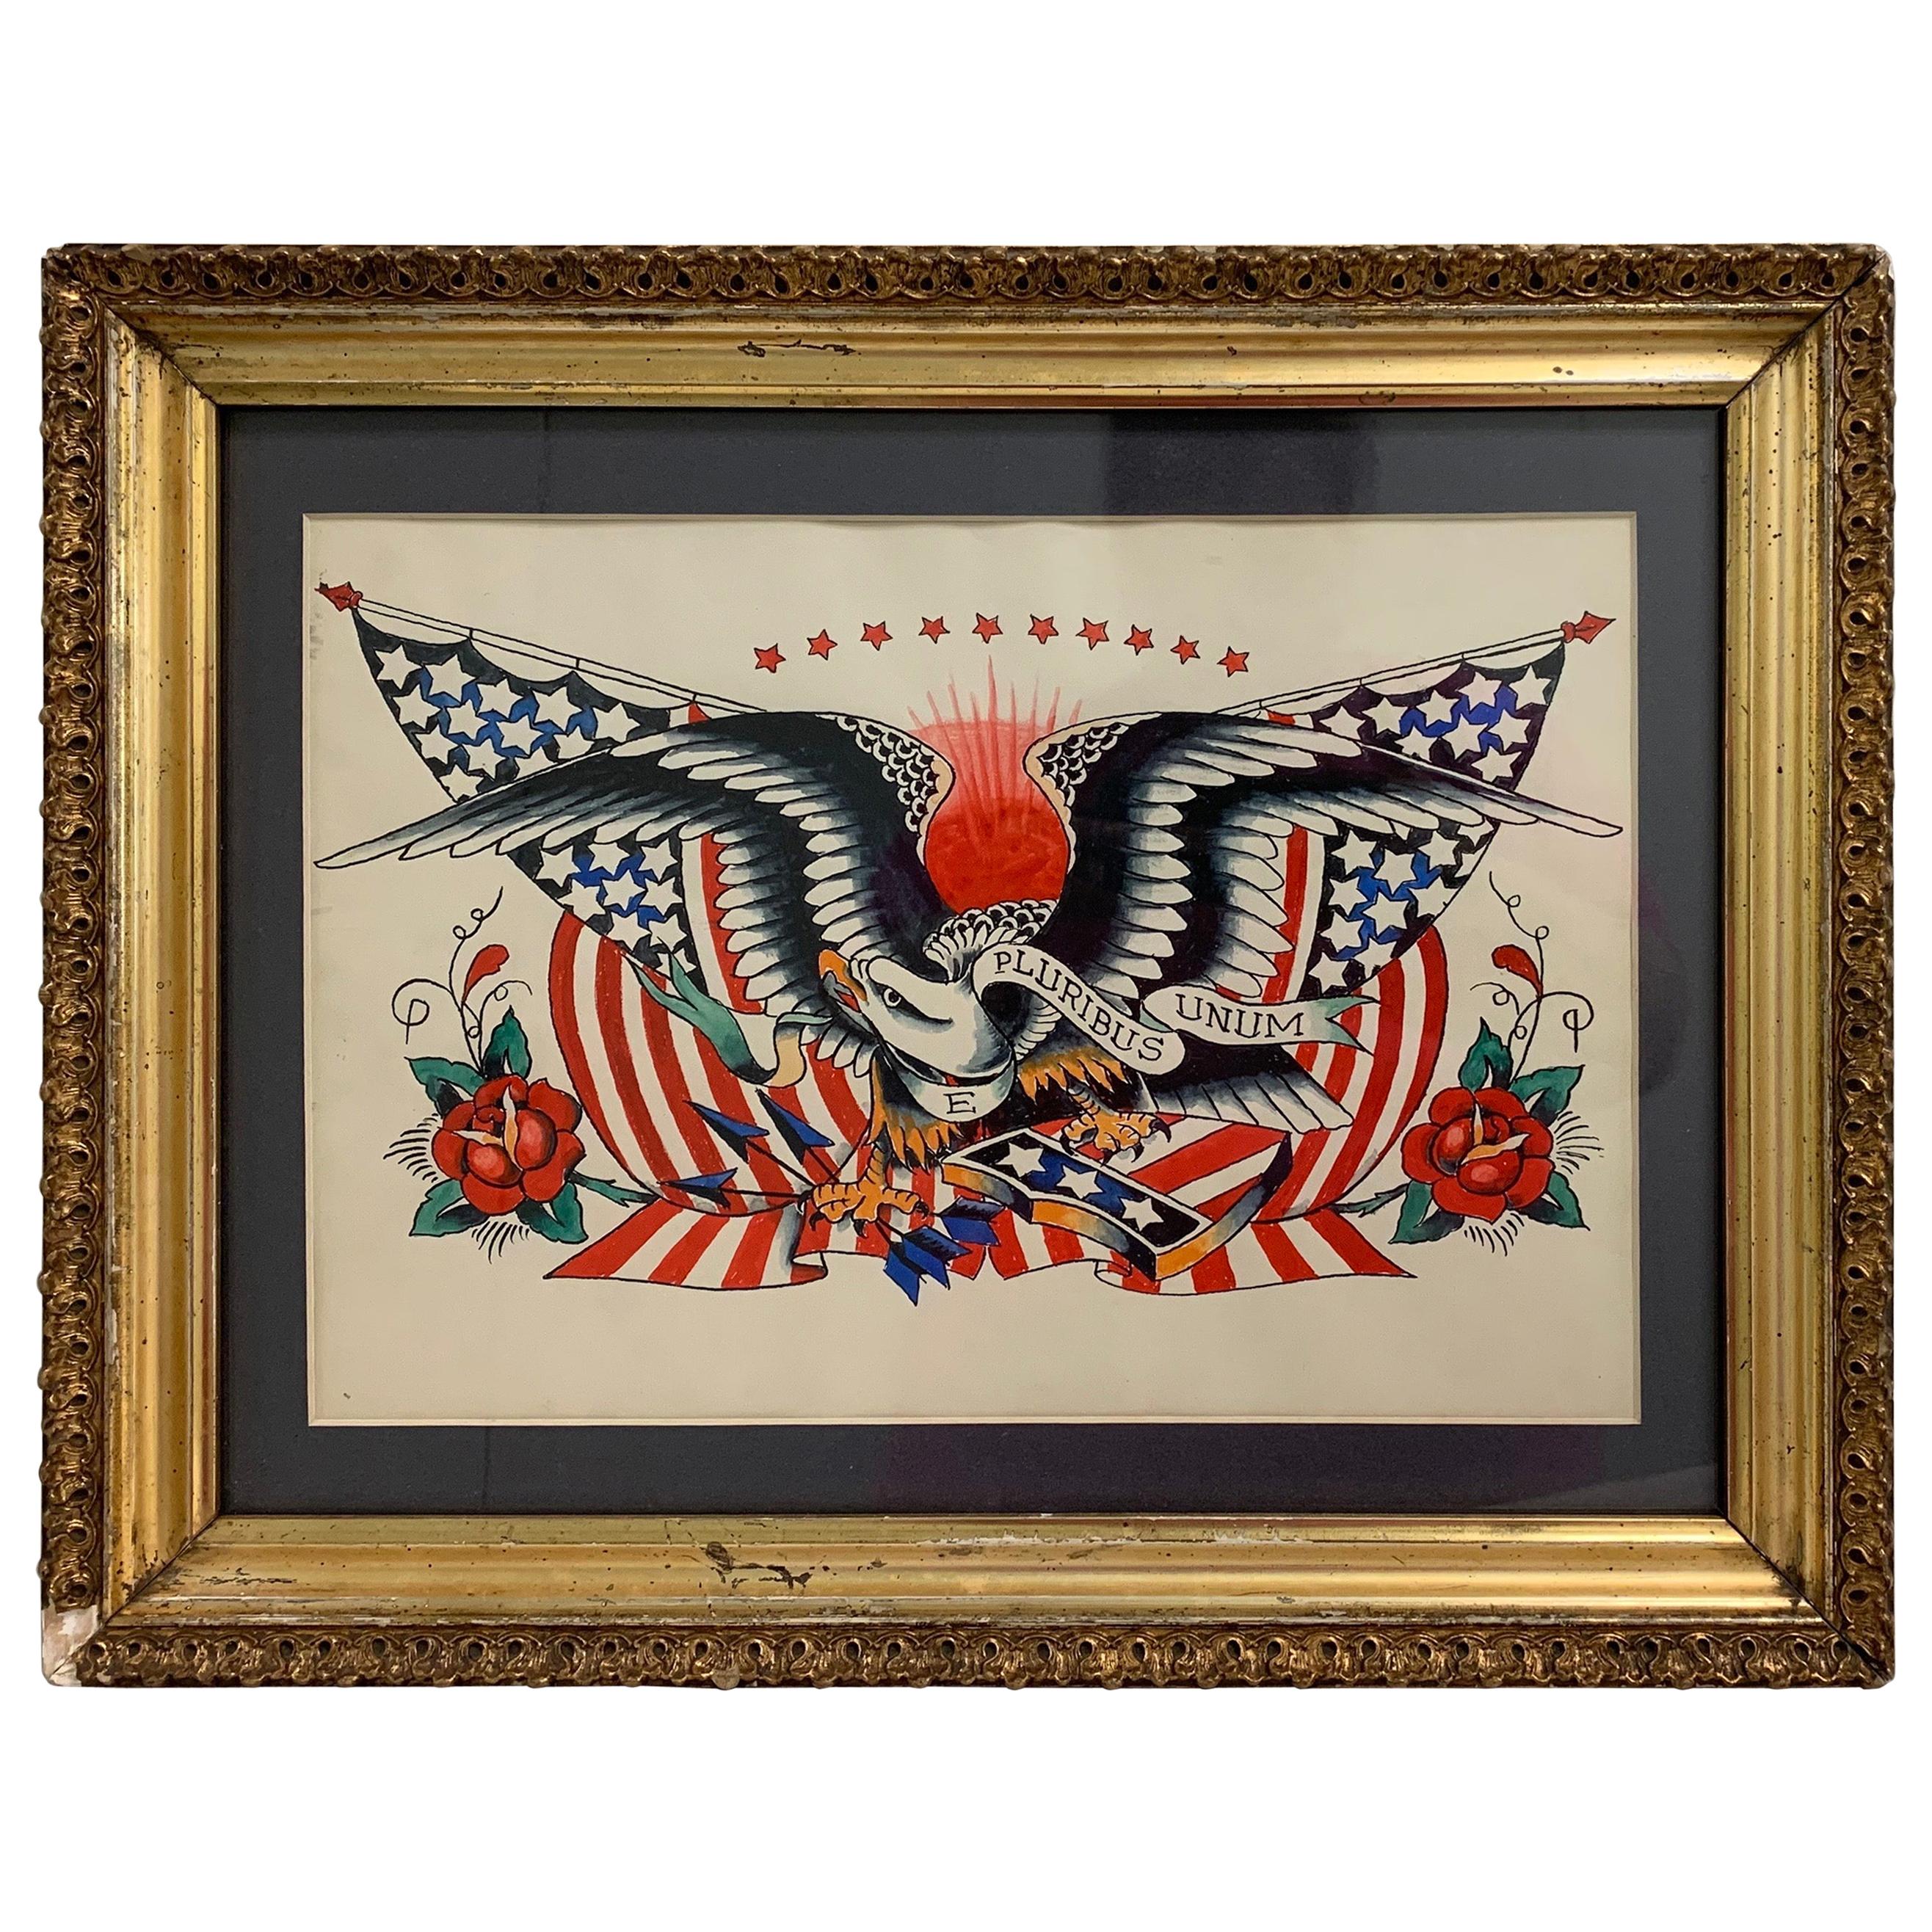 Framed antique American Folk Art tattoo art eagle wall art. Frame has overall wear, chips and should be re-framed.